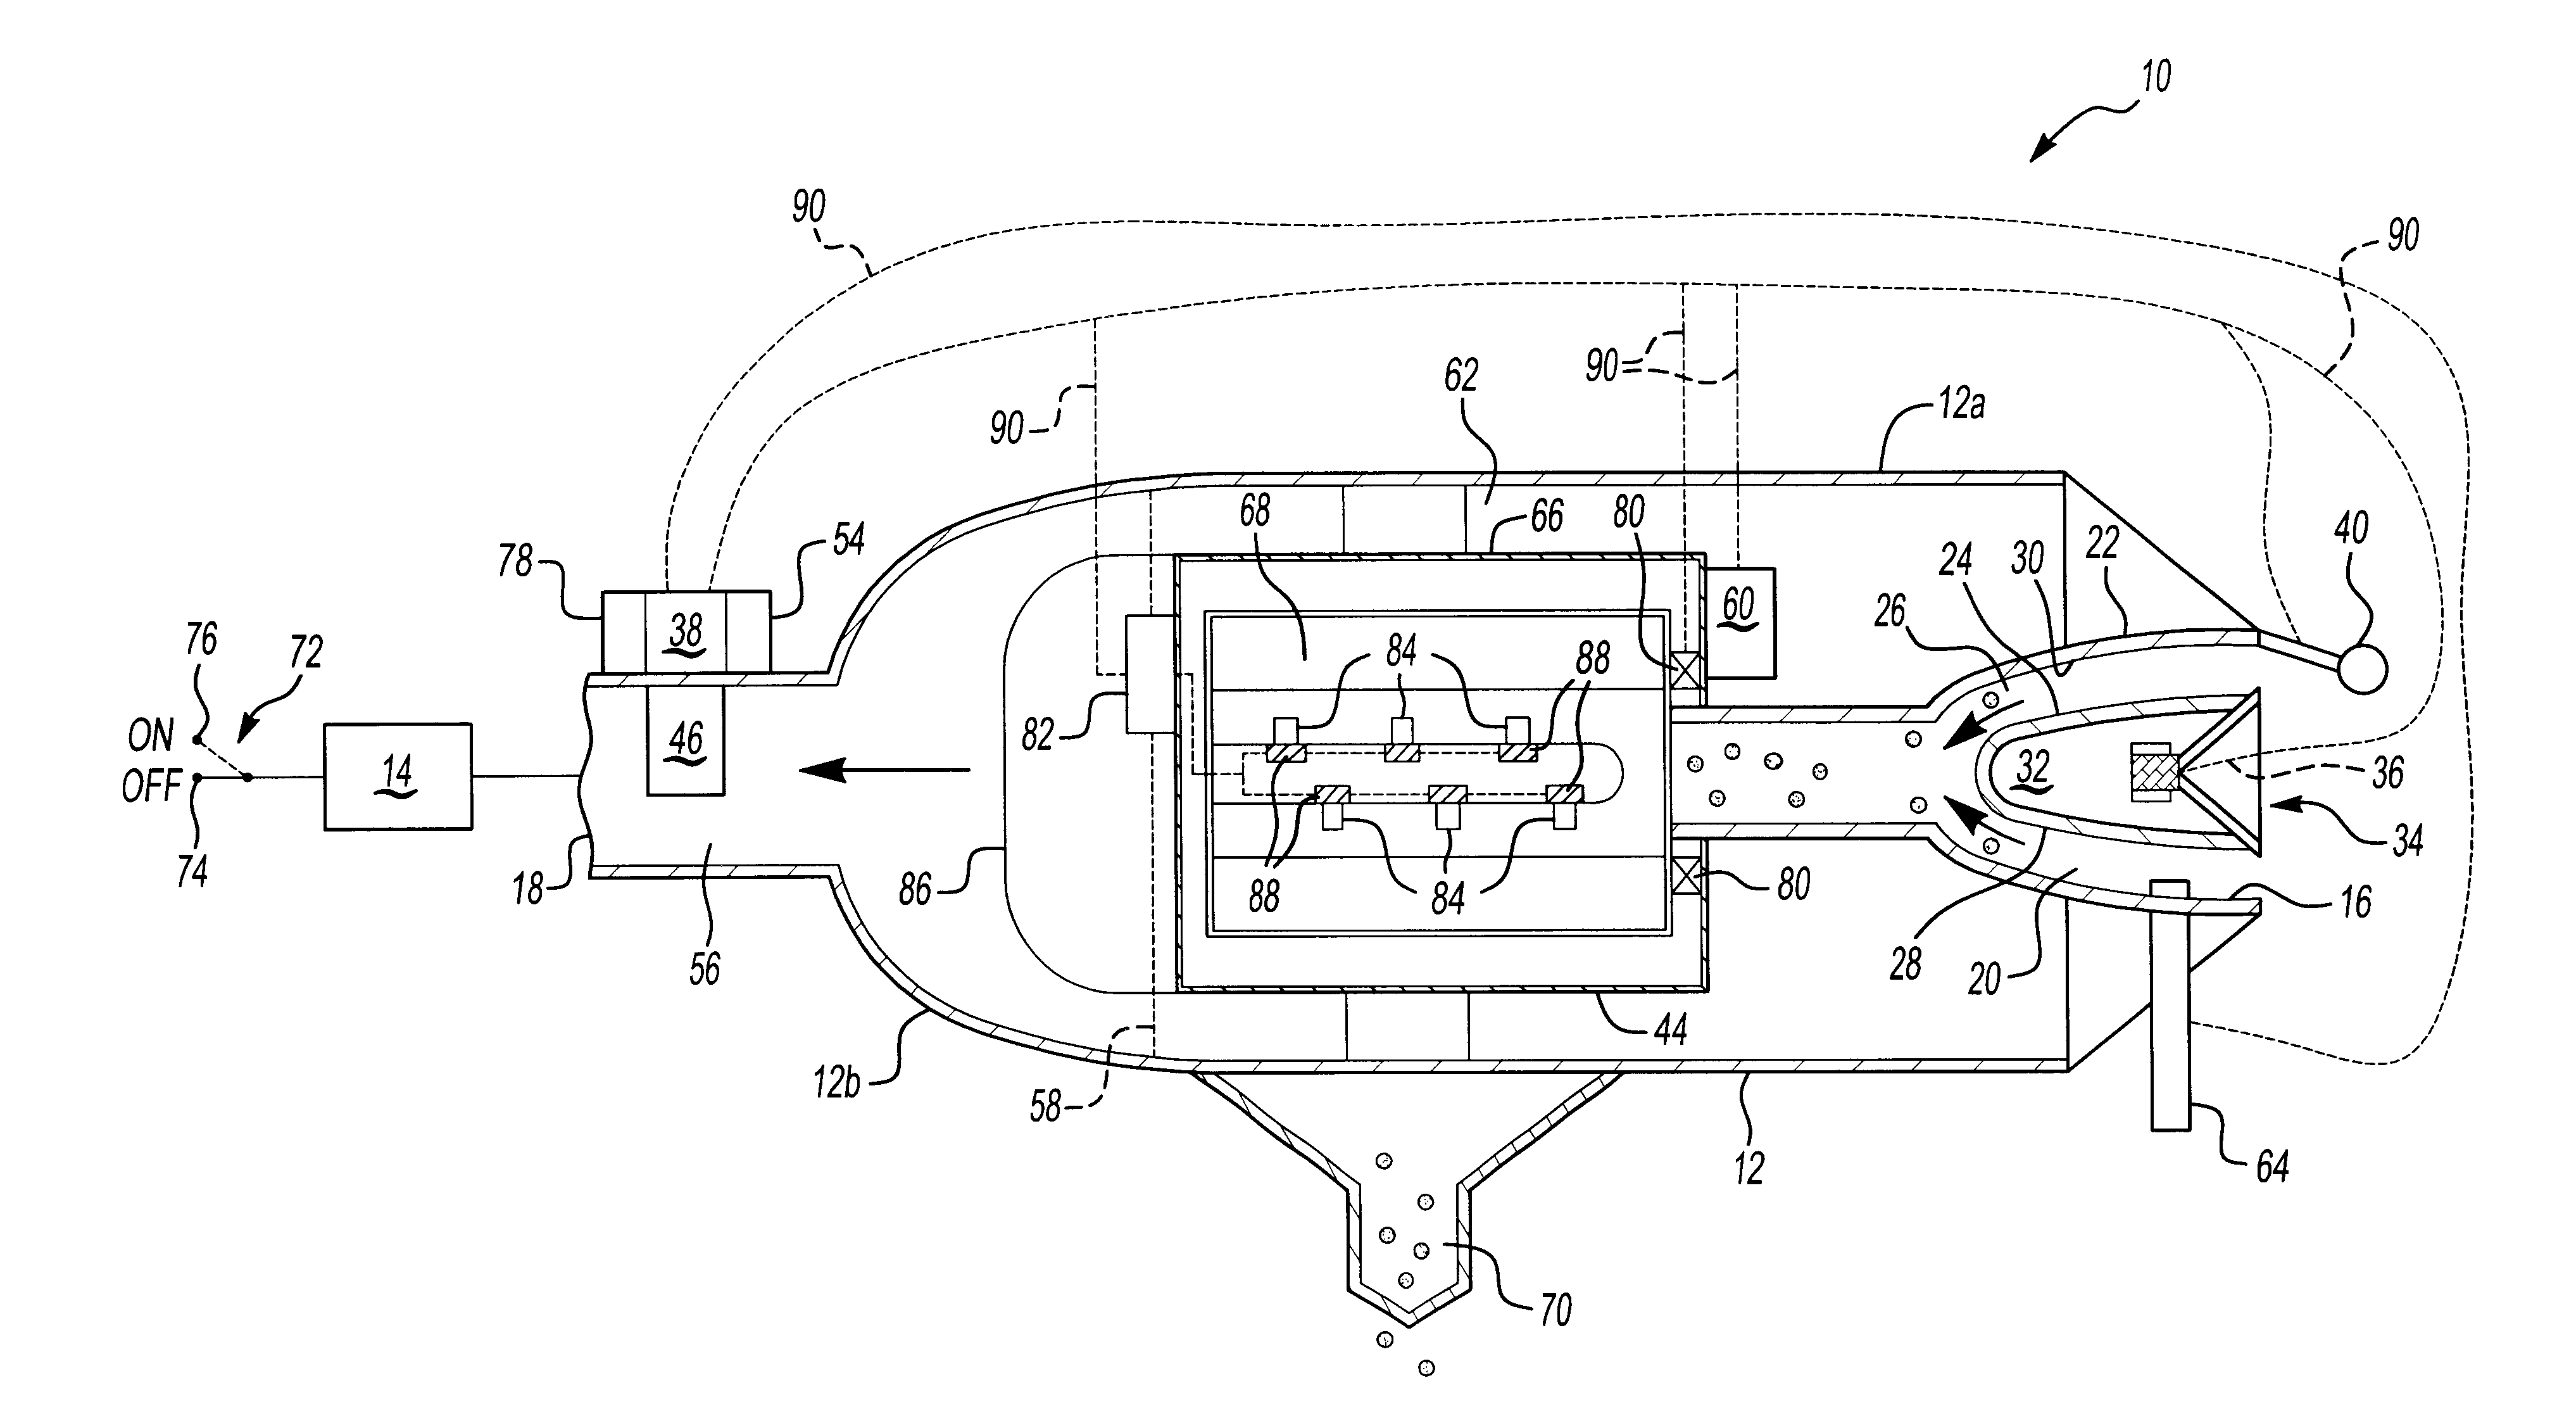 Integrated active noise control with self-cleaning filter apparatus